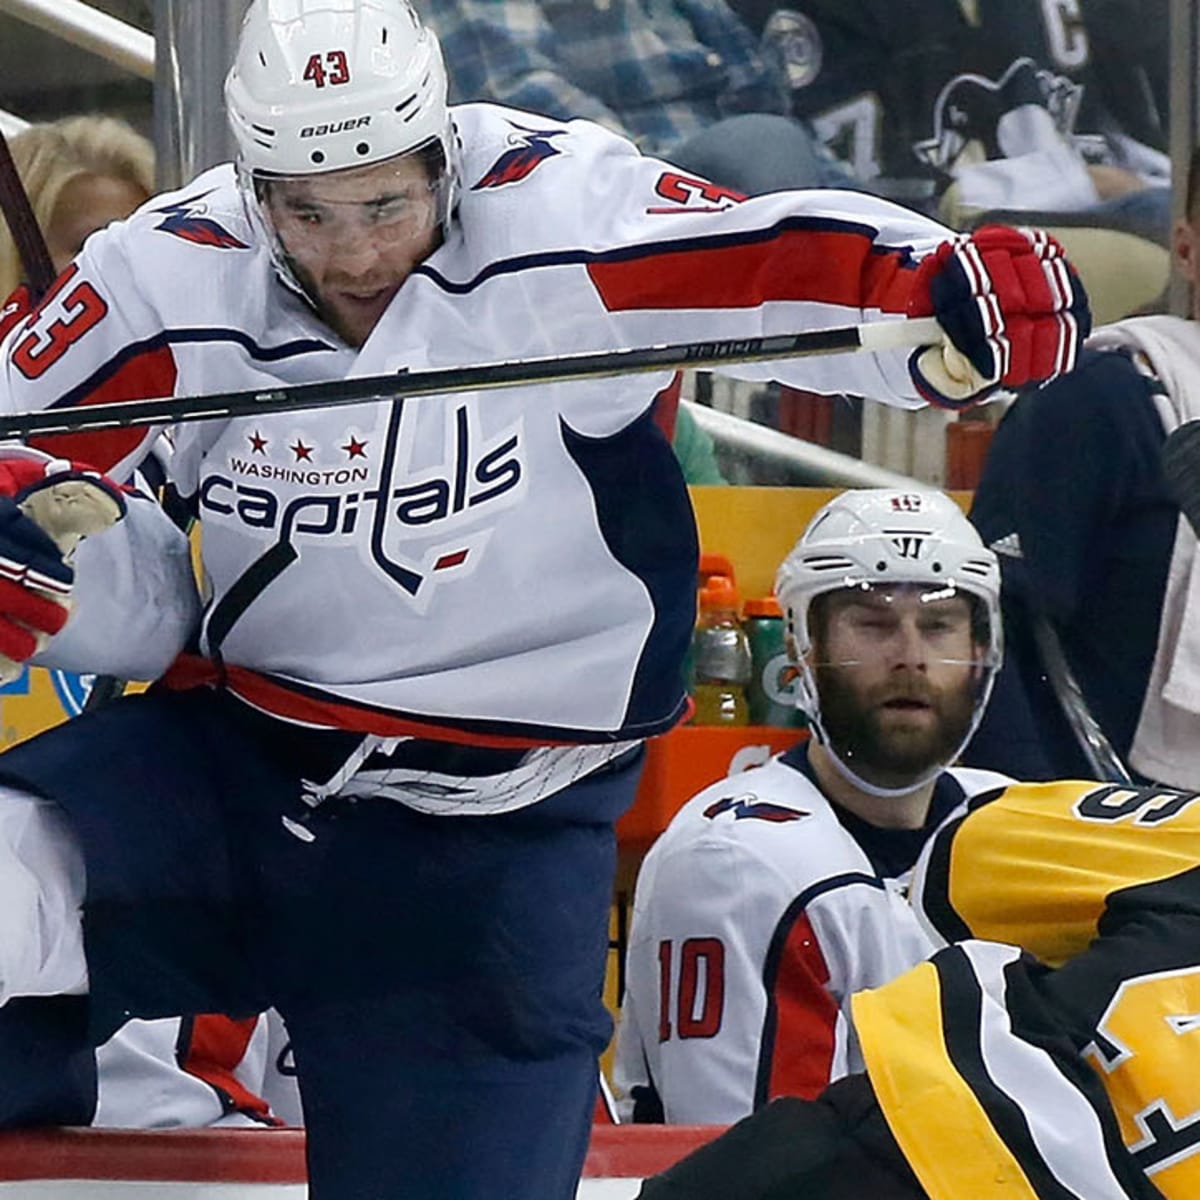 Washington Capitals' Tom Wilson suspended seven games by NHL for